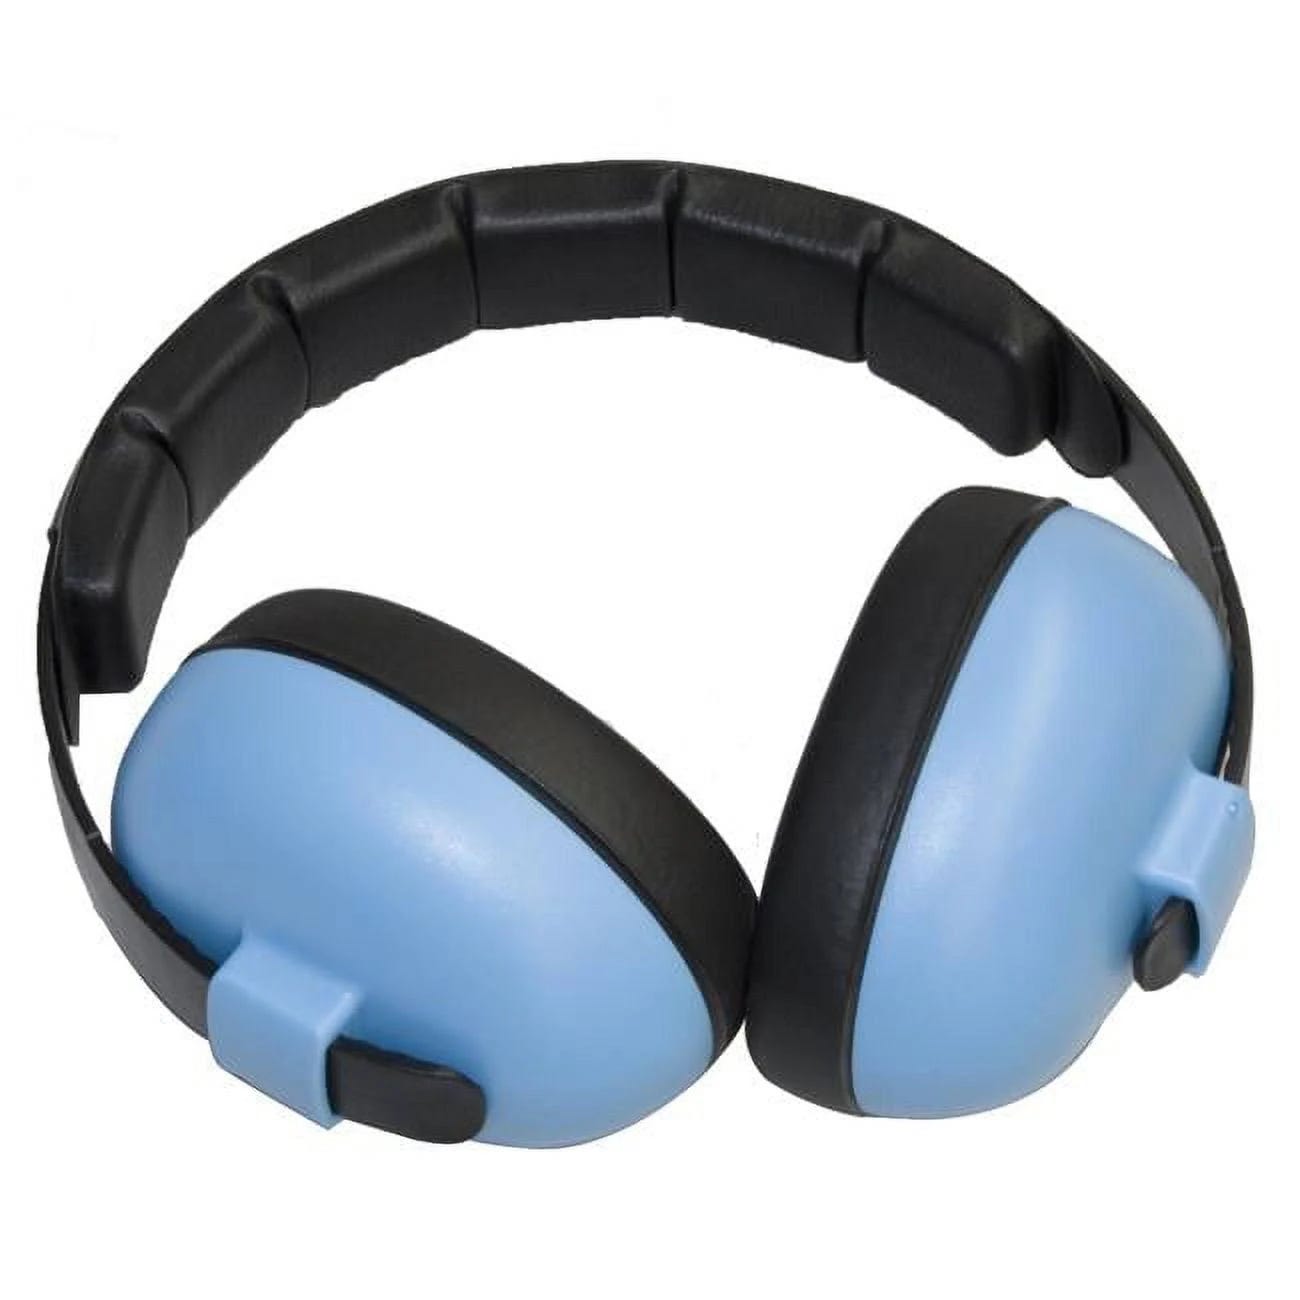 Comfortable Baby Headphones with Foam-Filled Cups | Image